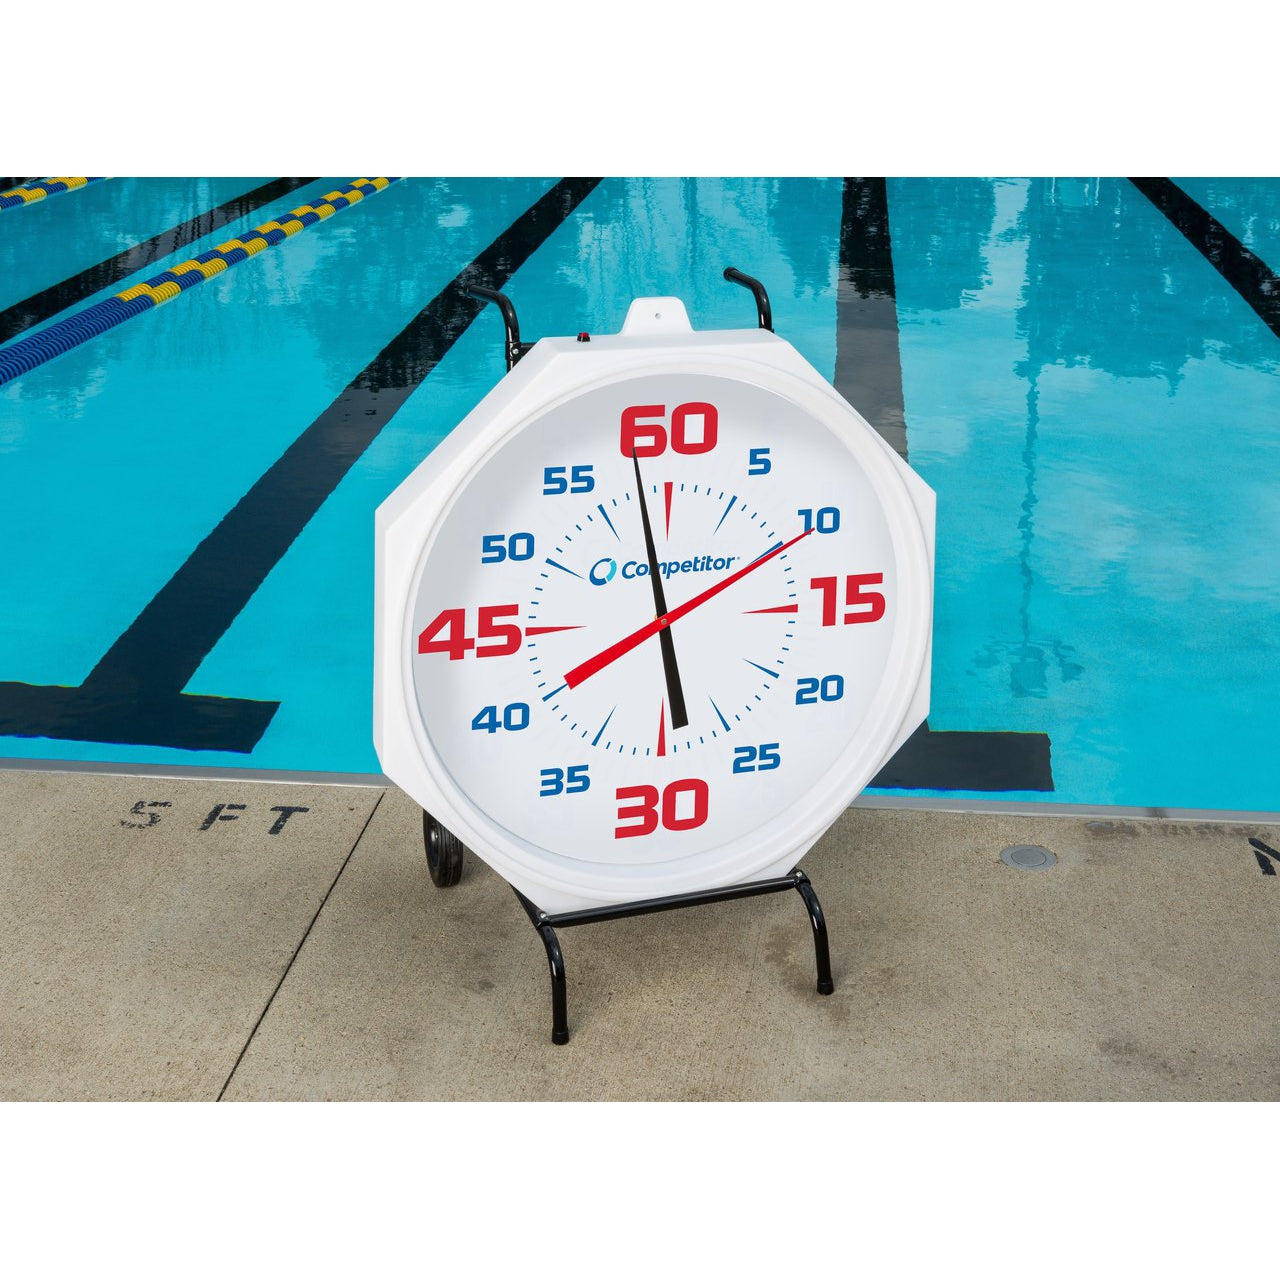 31" Competitor ELECTRIC Pace Clock Pace Clocks Competitor 